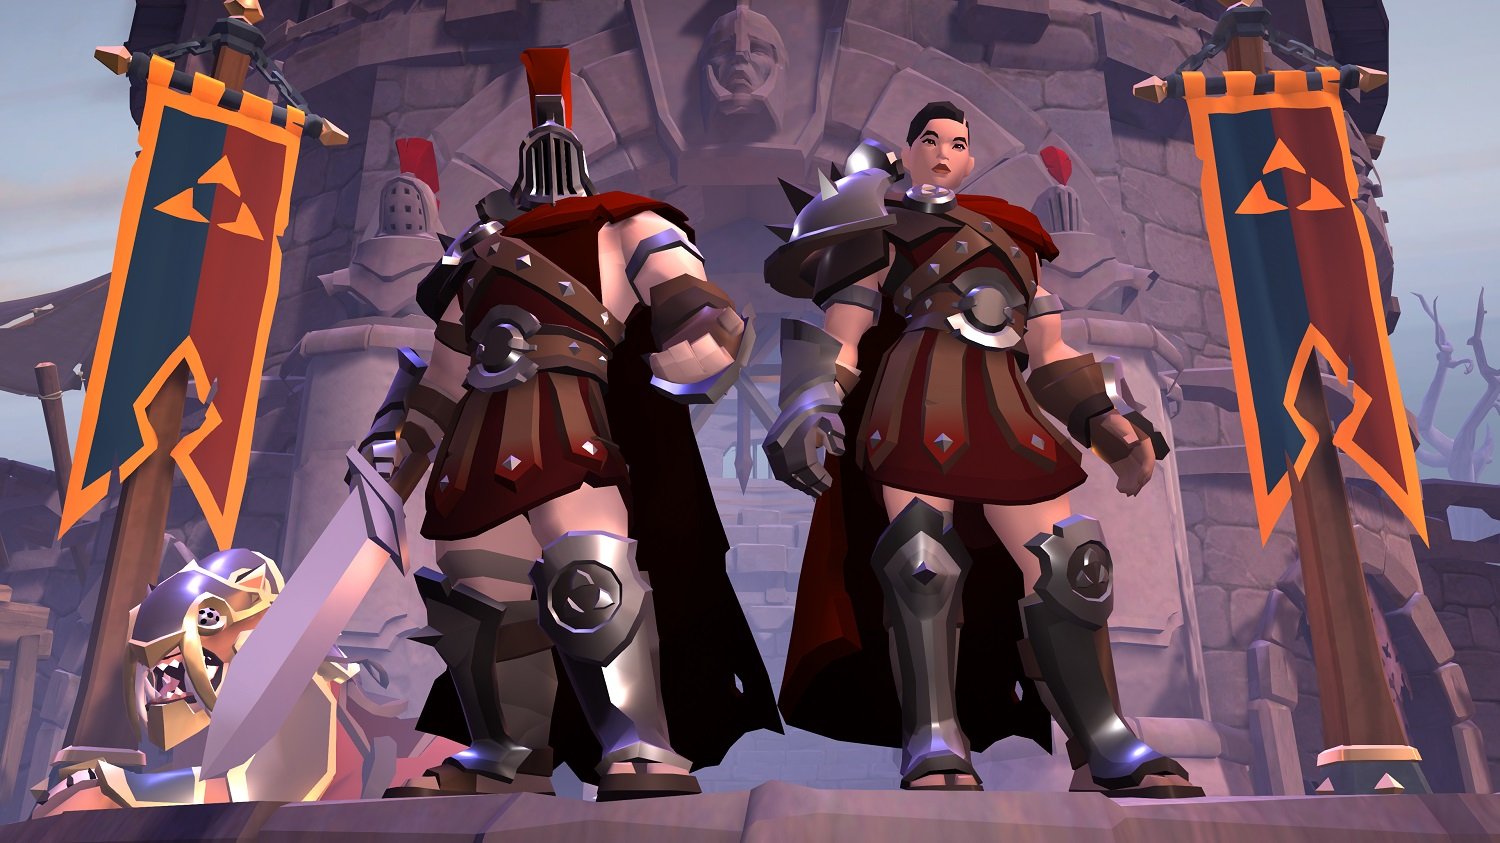 Albion Online: New Player Experience in 2022 